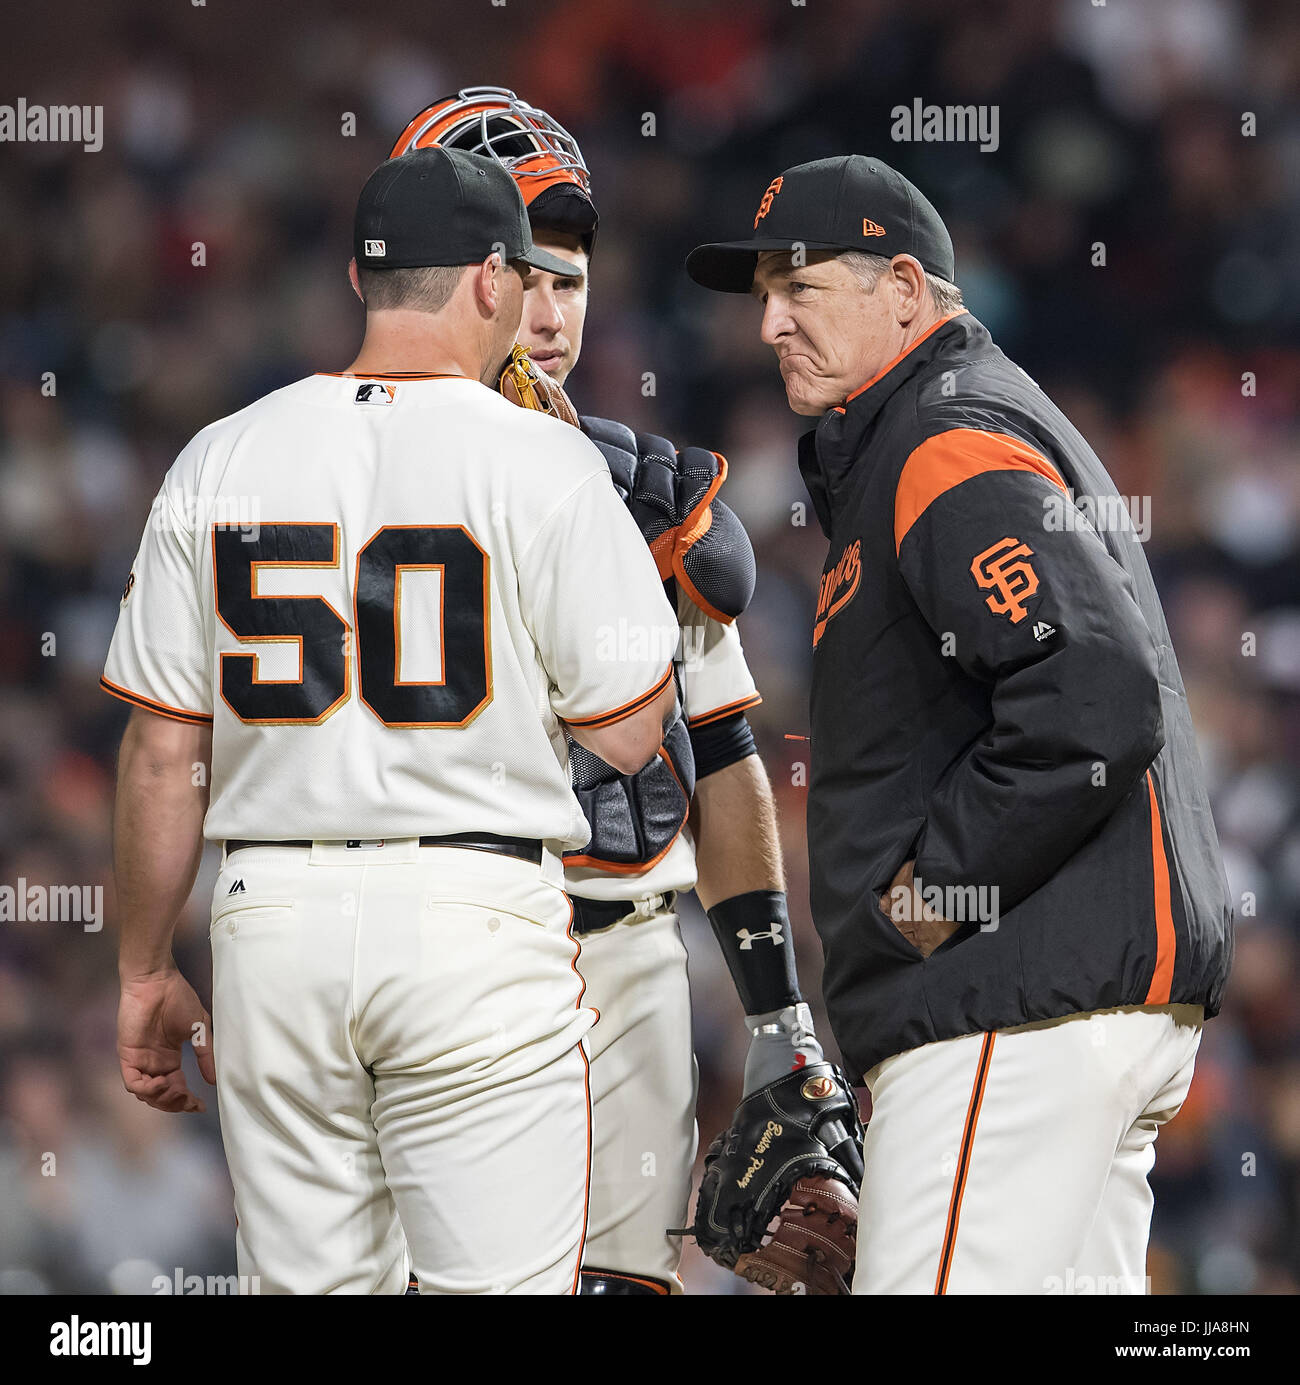 San Francisco, California, USA. 18th July, 2017. In the seventh inning with two outs, San Francisco Giants pitching coach Dave Righetti (19) checks in with starting pitcher Ty Blach (50), and catcher Buster Posey (28) at the mound, during a MLB baseball game between the Cleveland Indians and the San Francisco Giants at AT&T Park in San Francisco, California. Valerie Shoaps/CSM/Alamy Live News Stock Photo